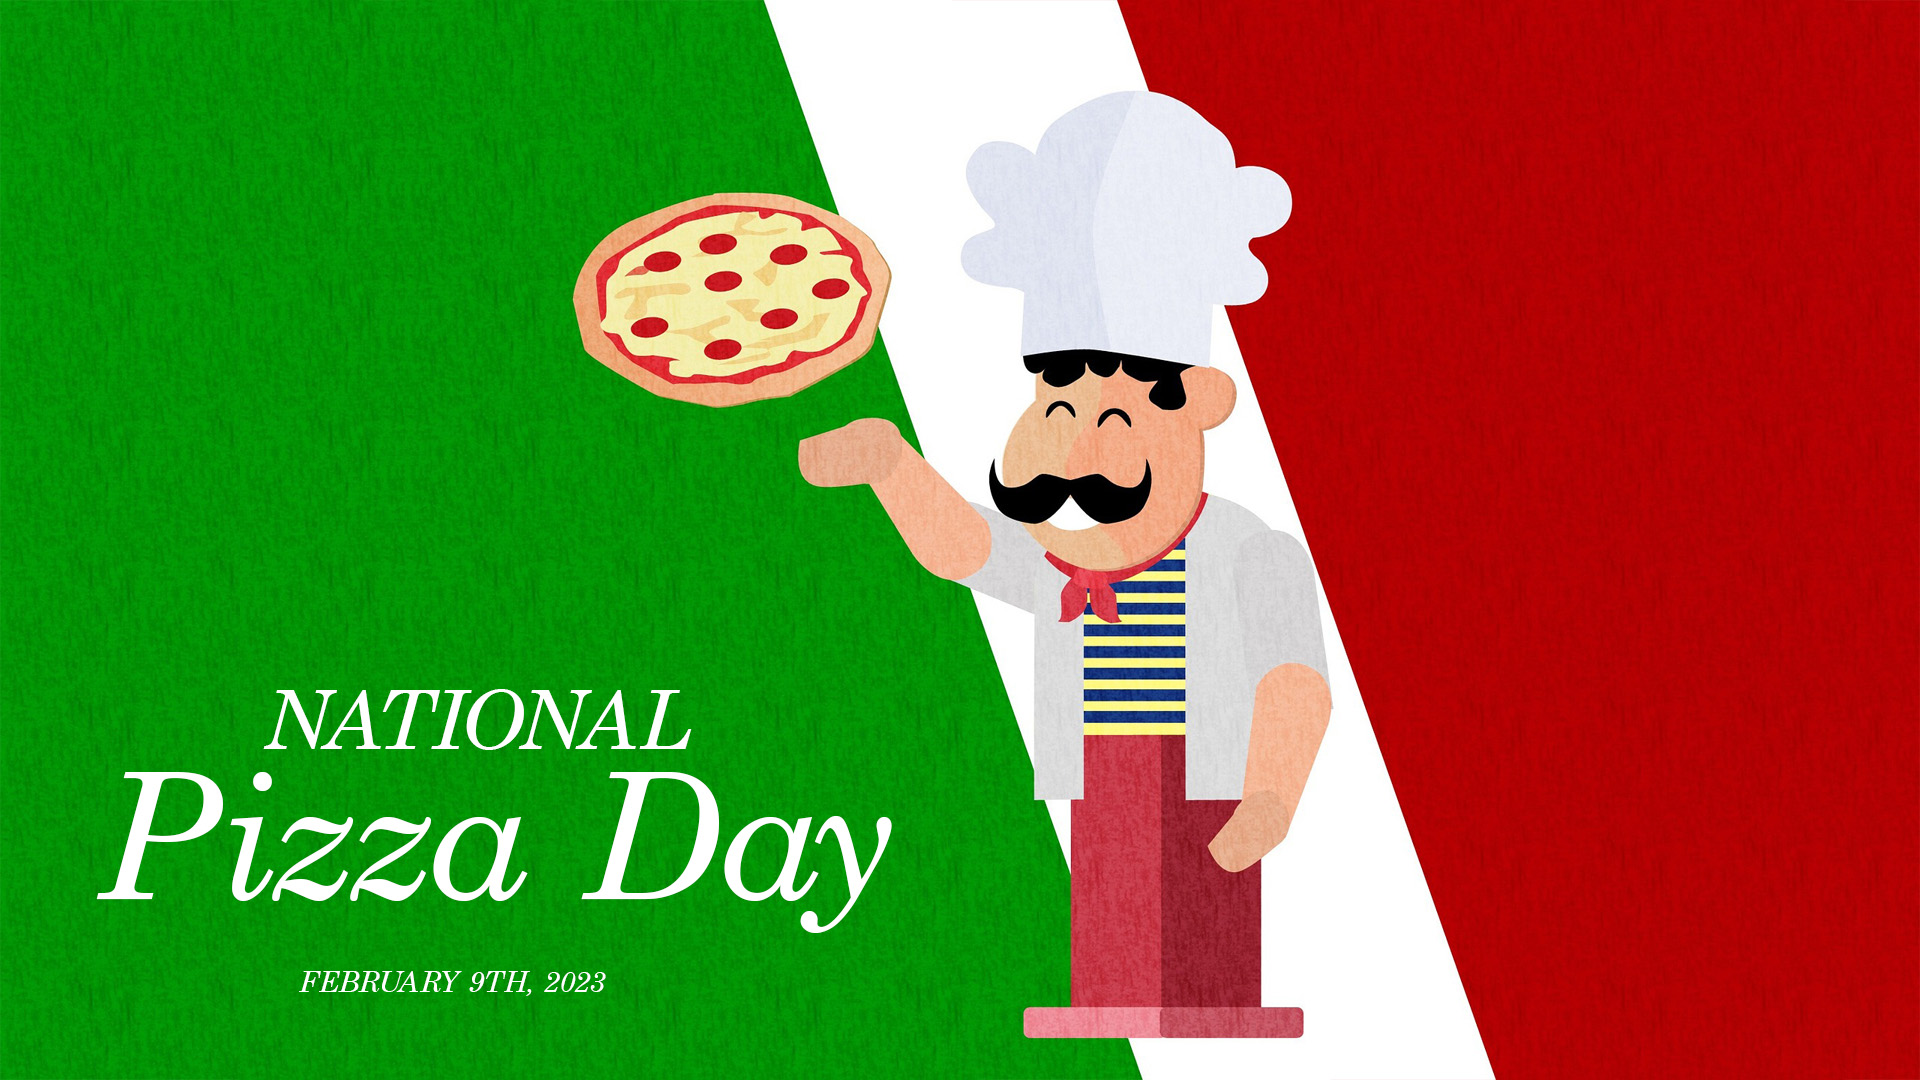 Background is made up of textured green, white, and red diagonal sections. Little illustrated italian chef throwing a pizza with a chef hat on.